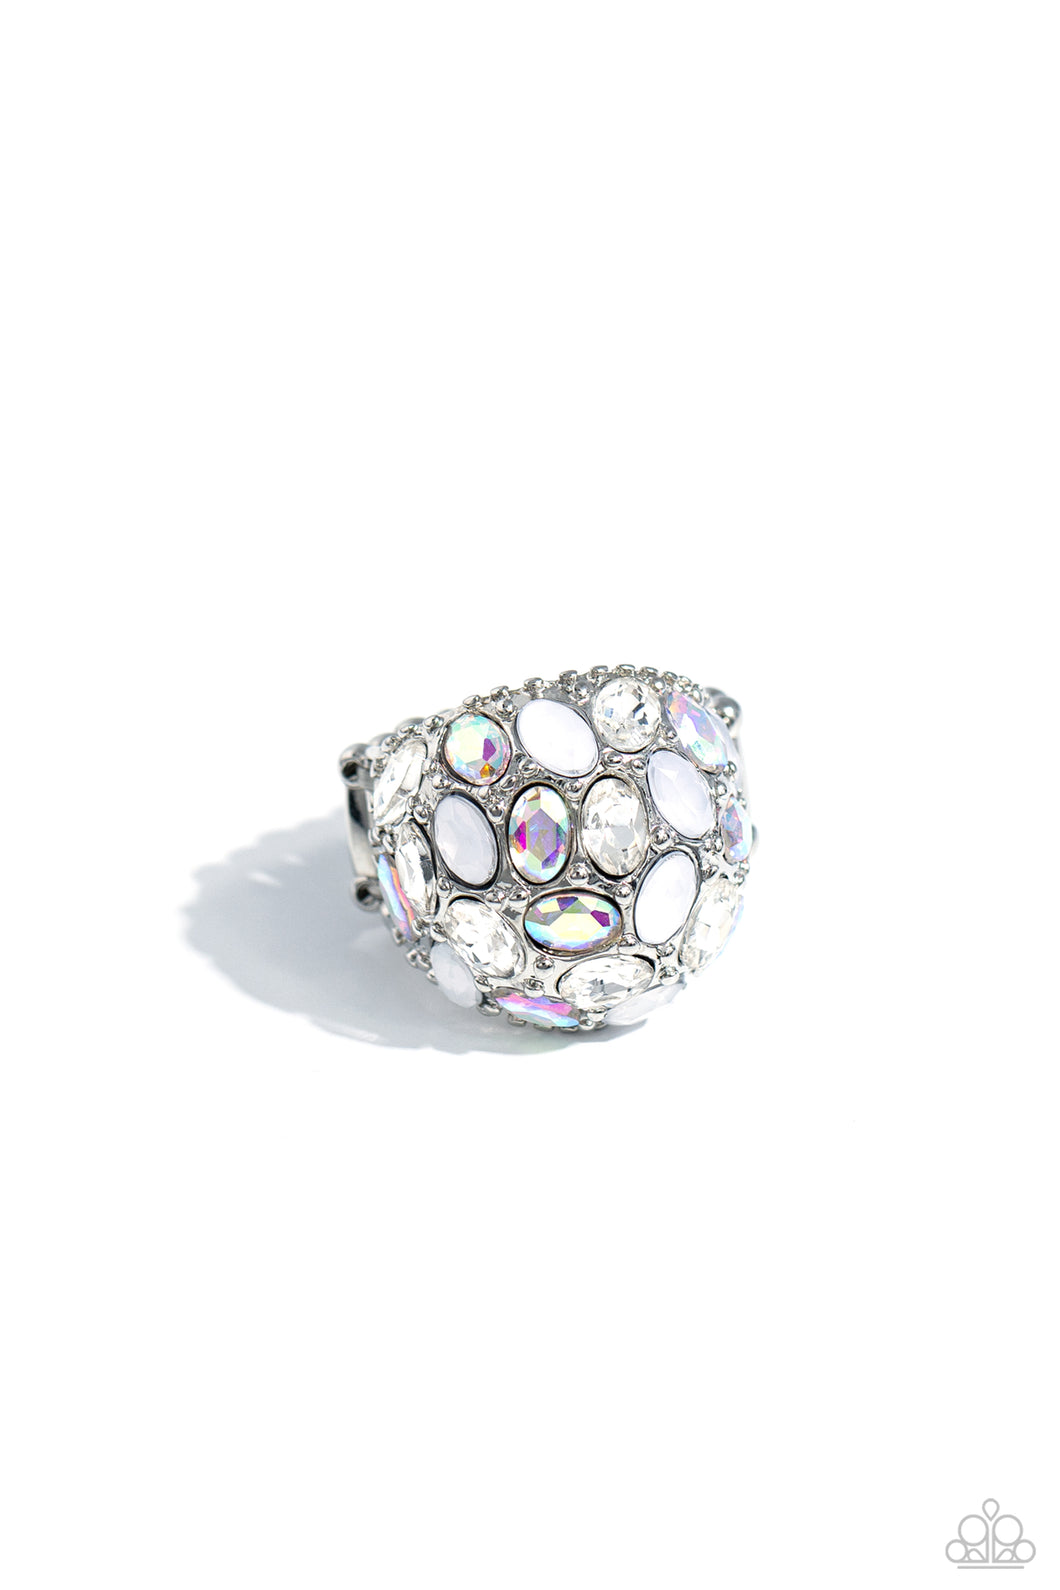 A studded silver frame, filled with blinding oval-cut gems in opalescent, white, and iridescent shades, stands out atop the finger for a blingy statement. Features a stretchy band for a flexible fit. Due to its prismatic palette, color may vary.  Sold as one individual ring.